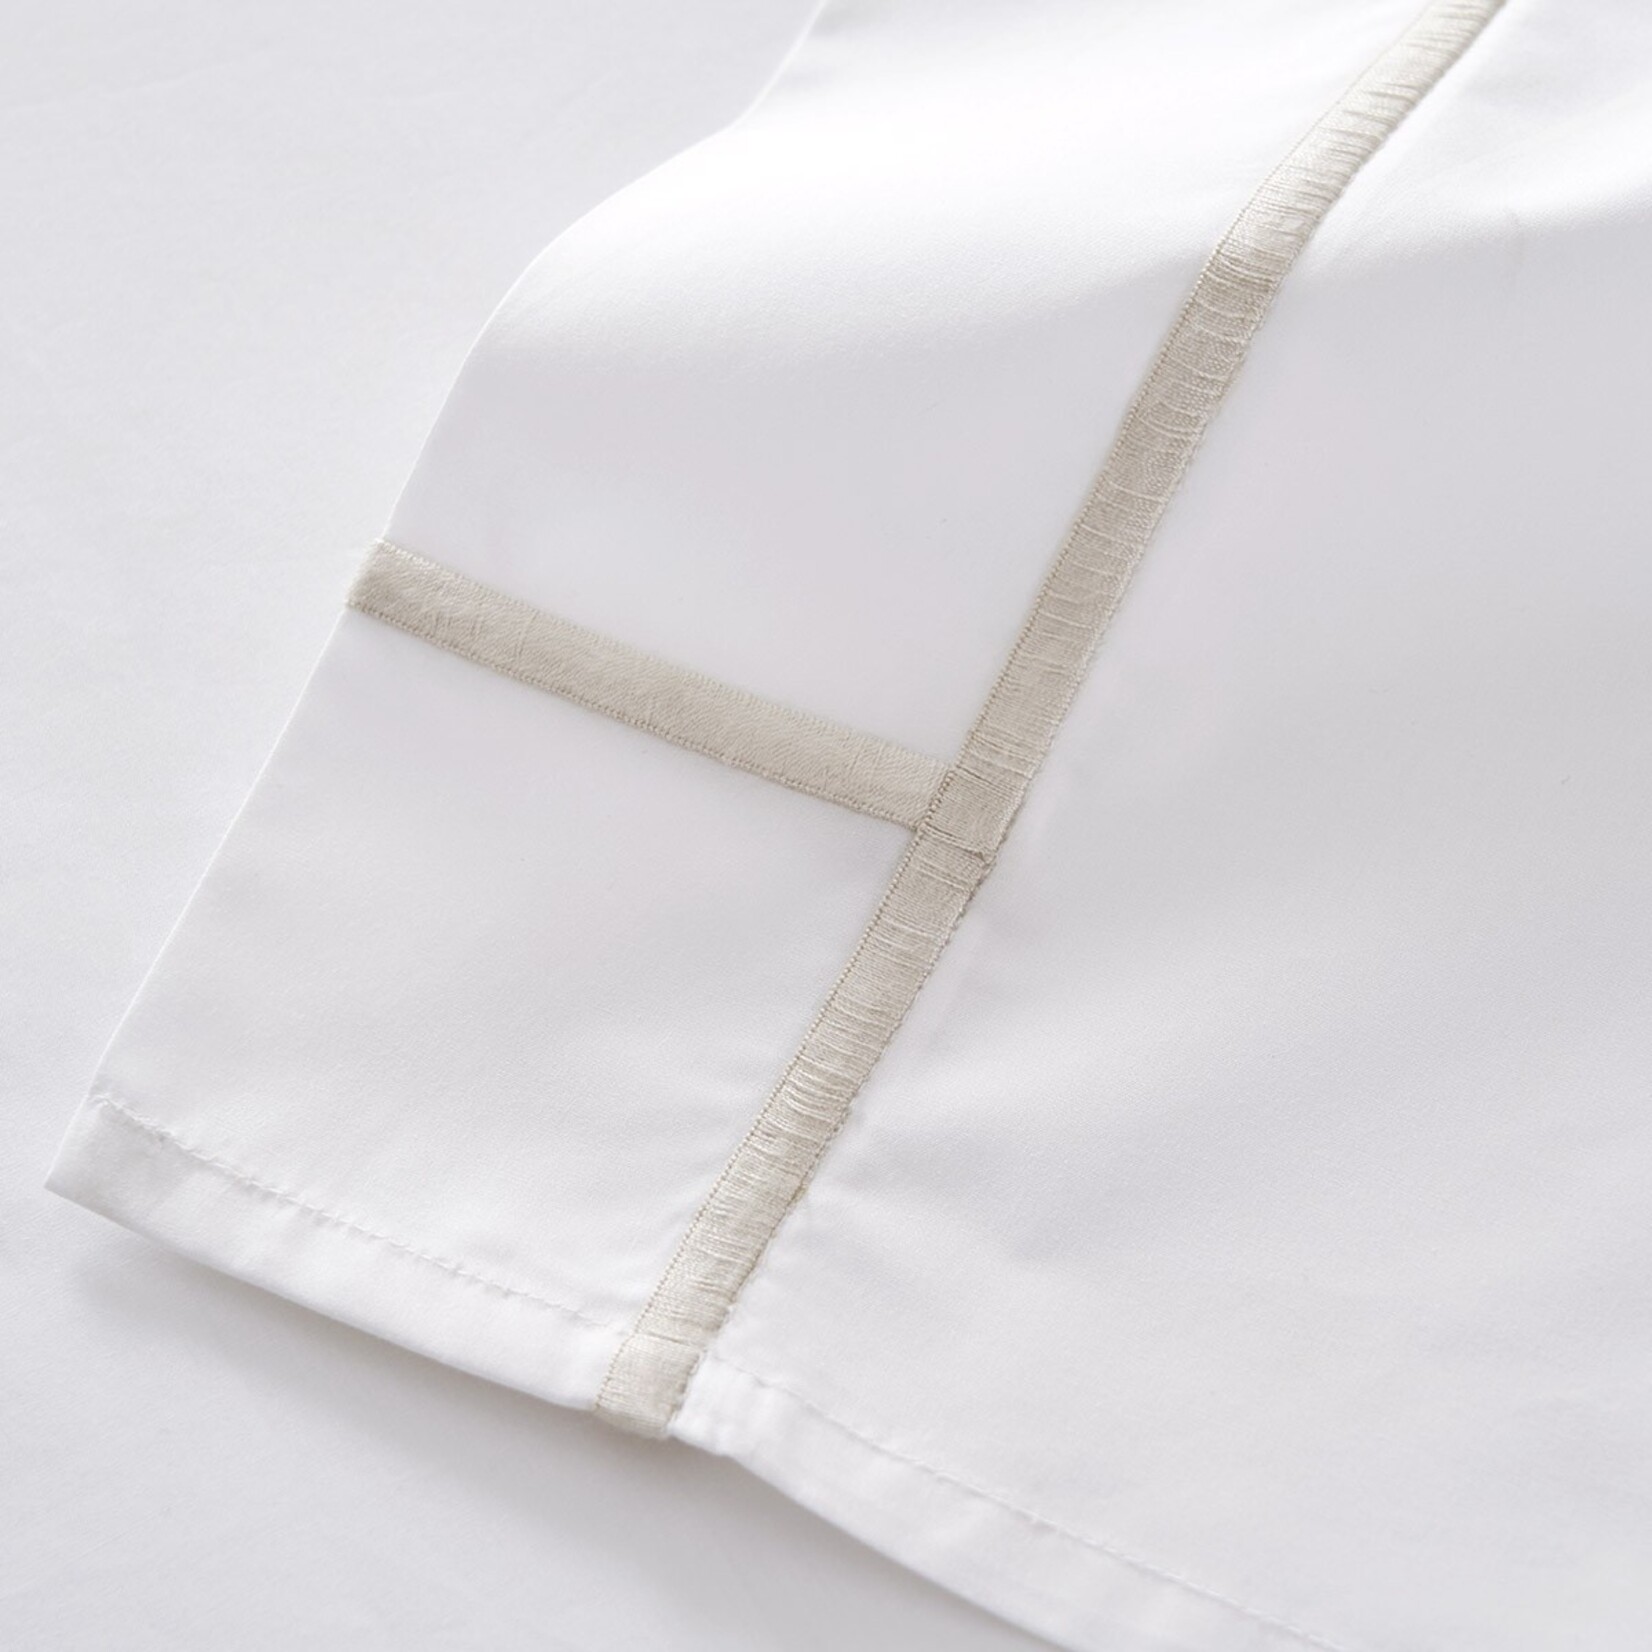 ATHENA (Embroidered-100% Supima Cotton Percale 500 t/t) Flat Sheet